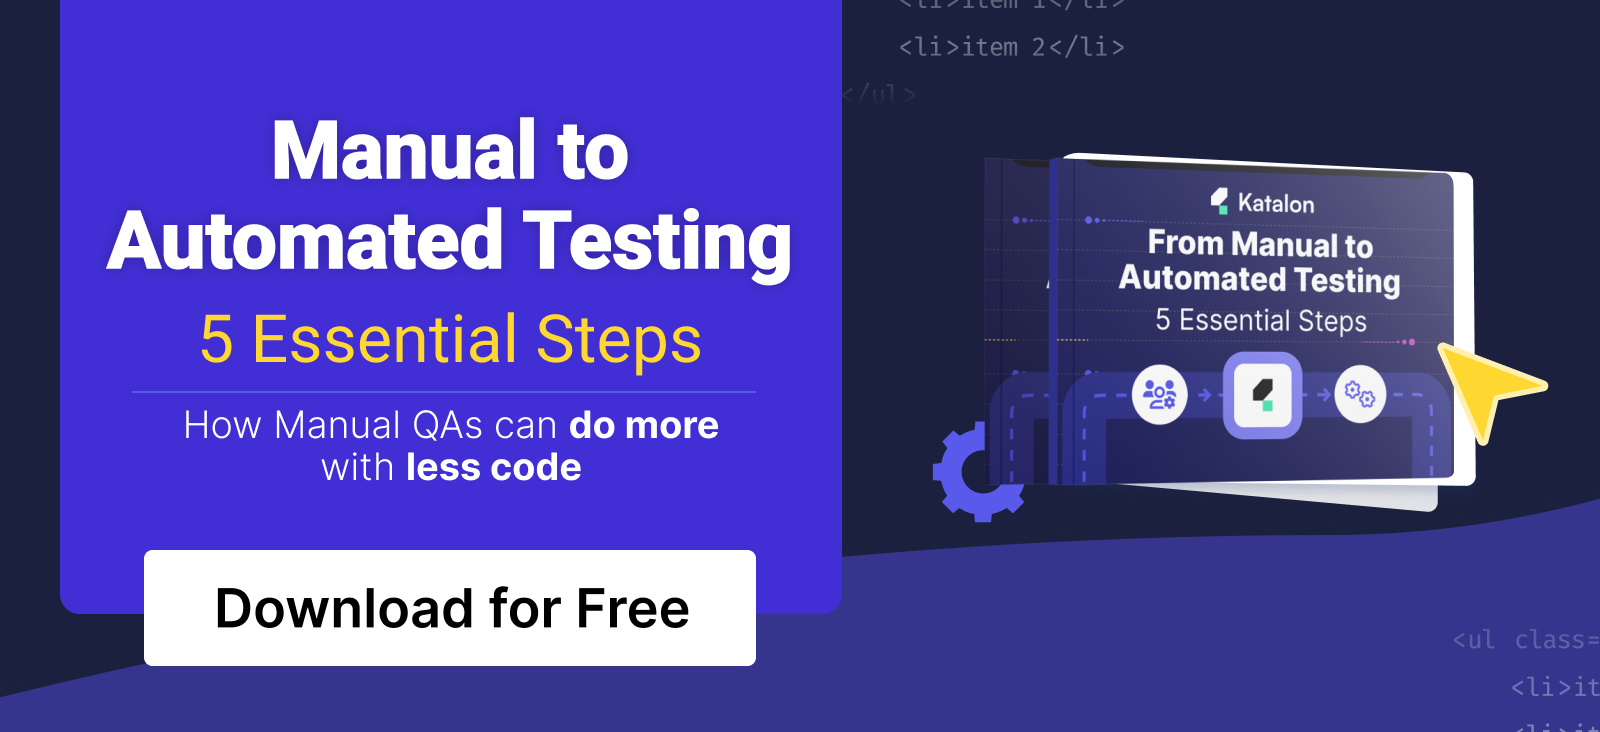 Download free ebook: Manual to Automated Testing